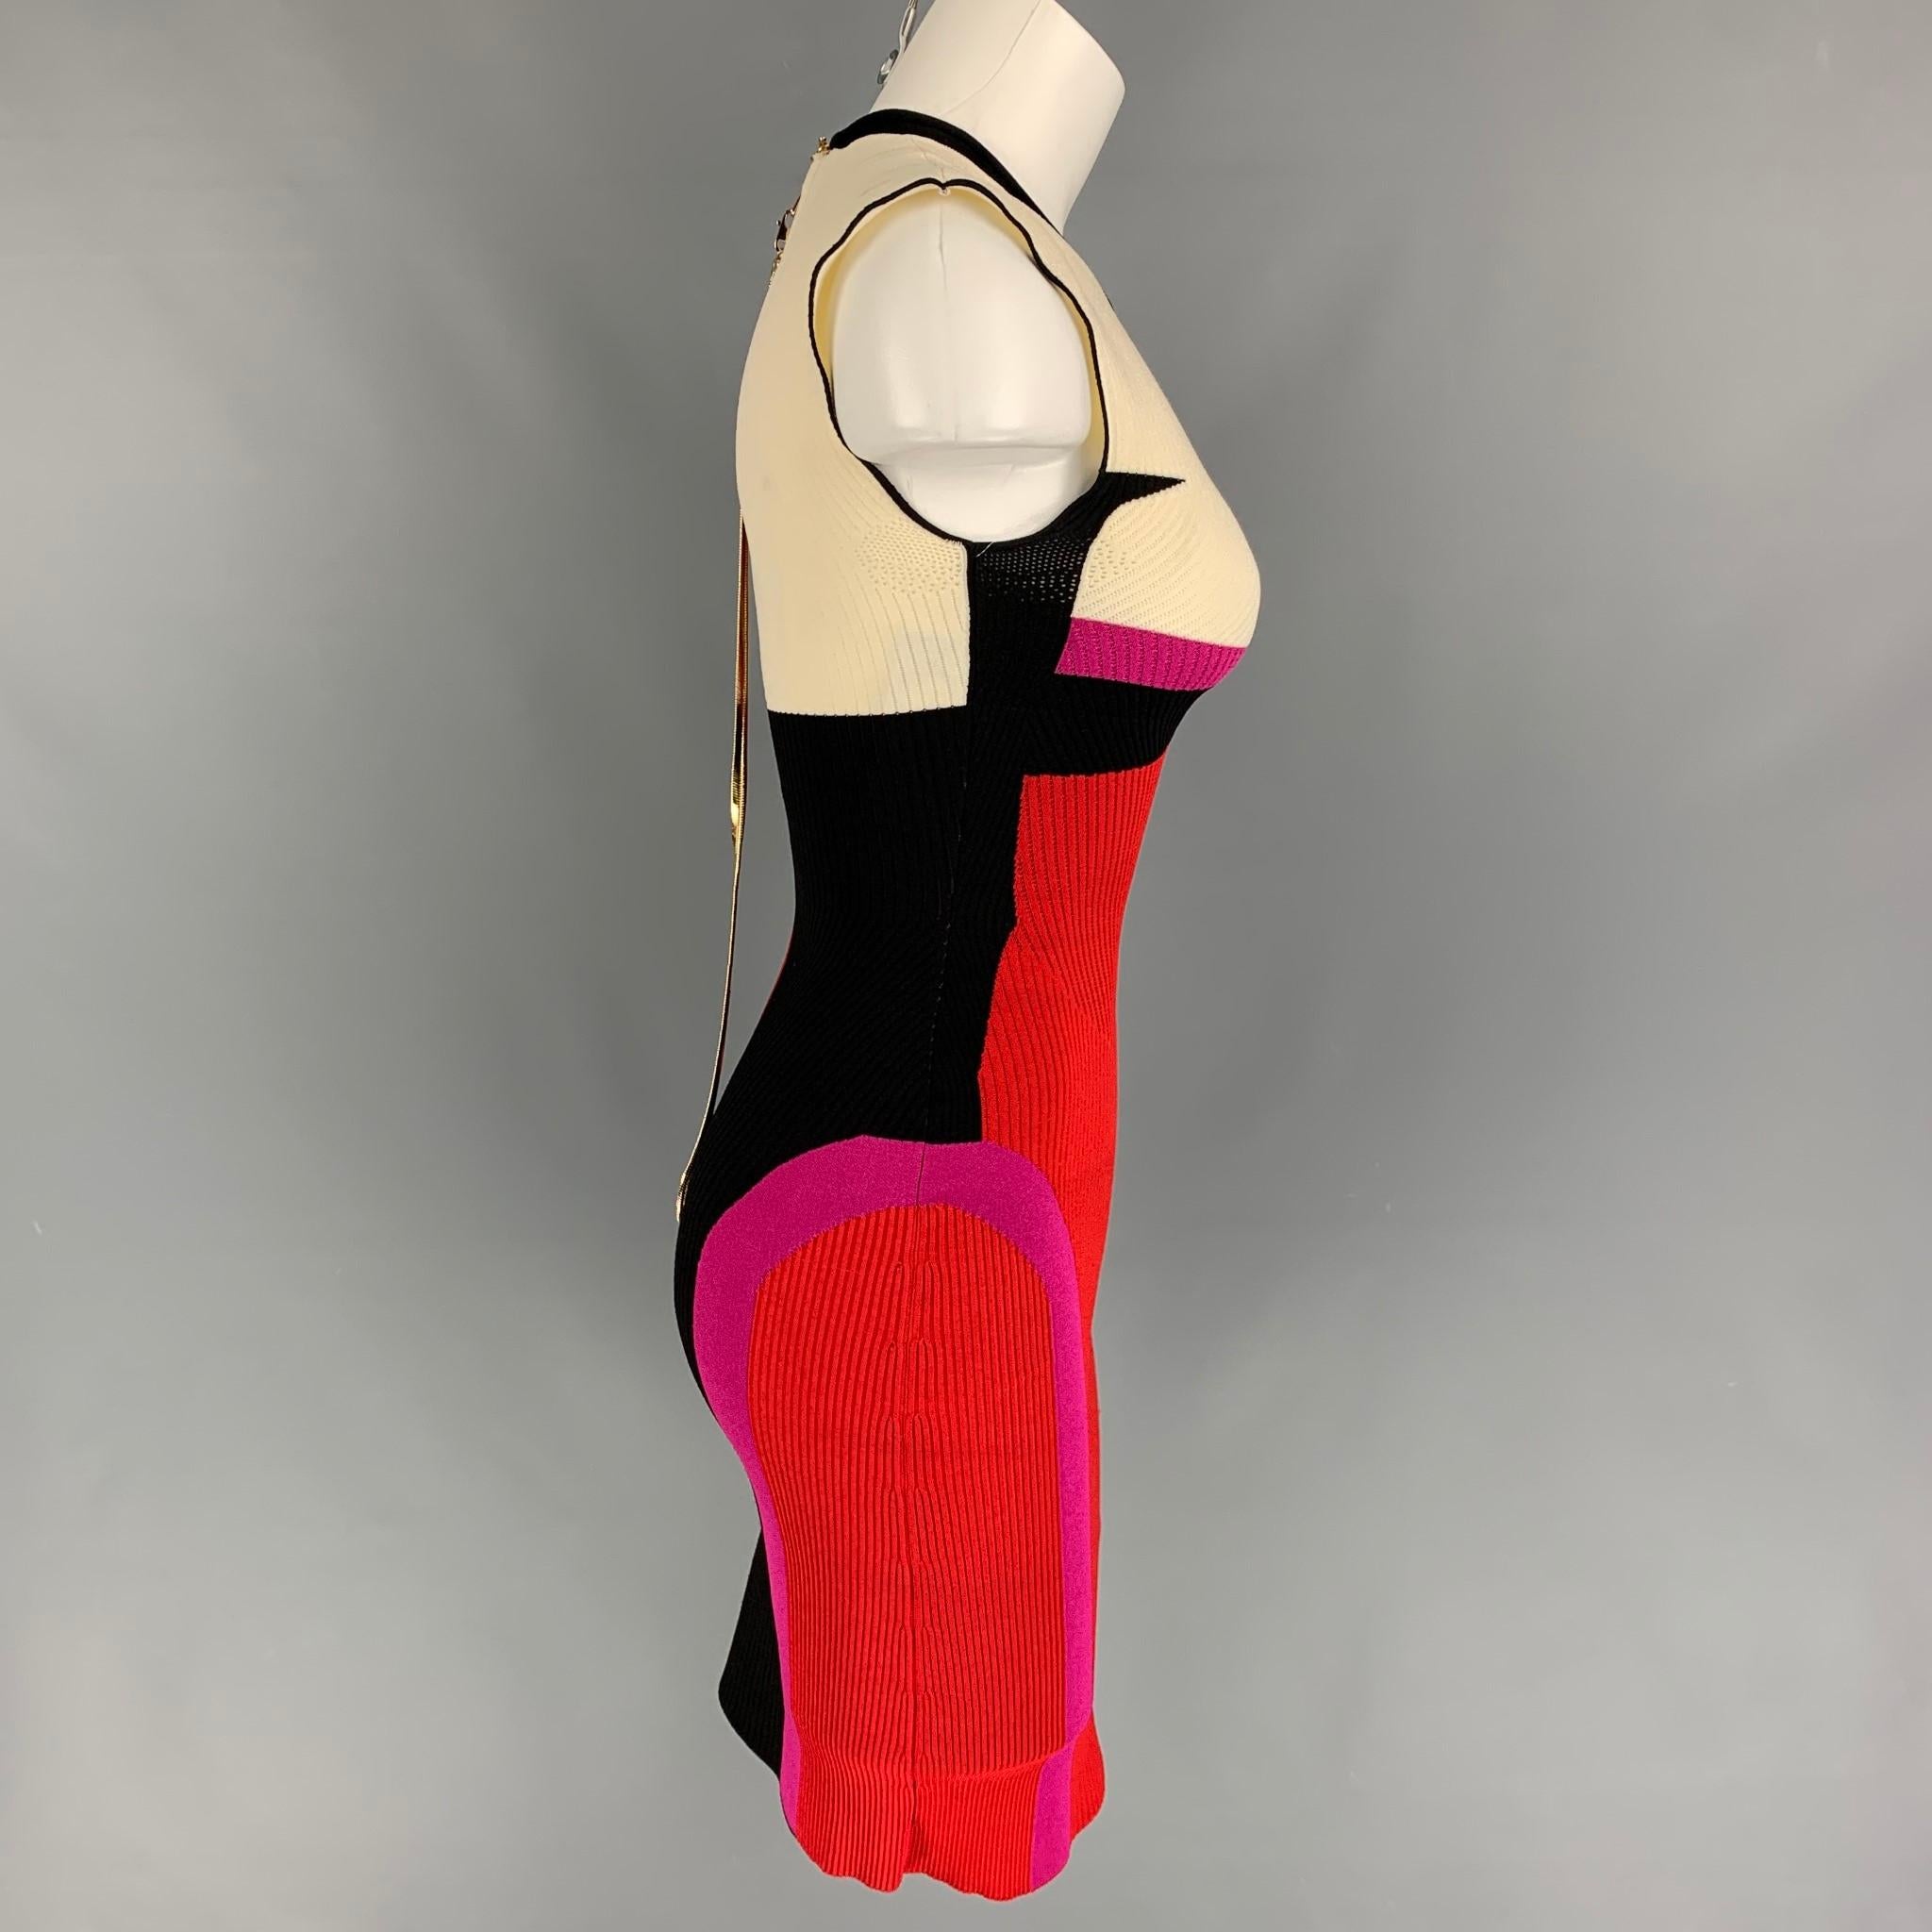 AZ FACTORY dress comes in a multi-color viscose blend featuring a color block style, sleeveless, gold tone hardware, crew-neck, detachable chain strap, and a back full zip up closure. 

Good Pre-Owned Condition. Light discoloration at back.
Marked: